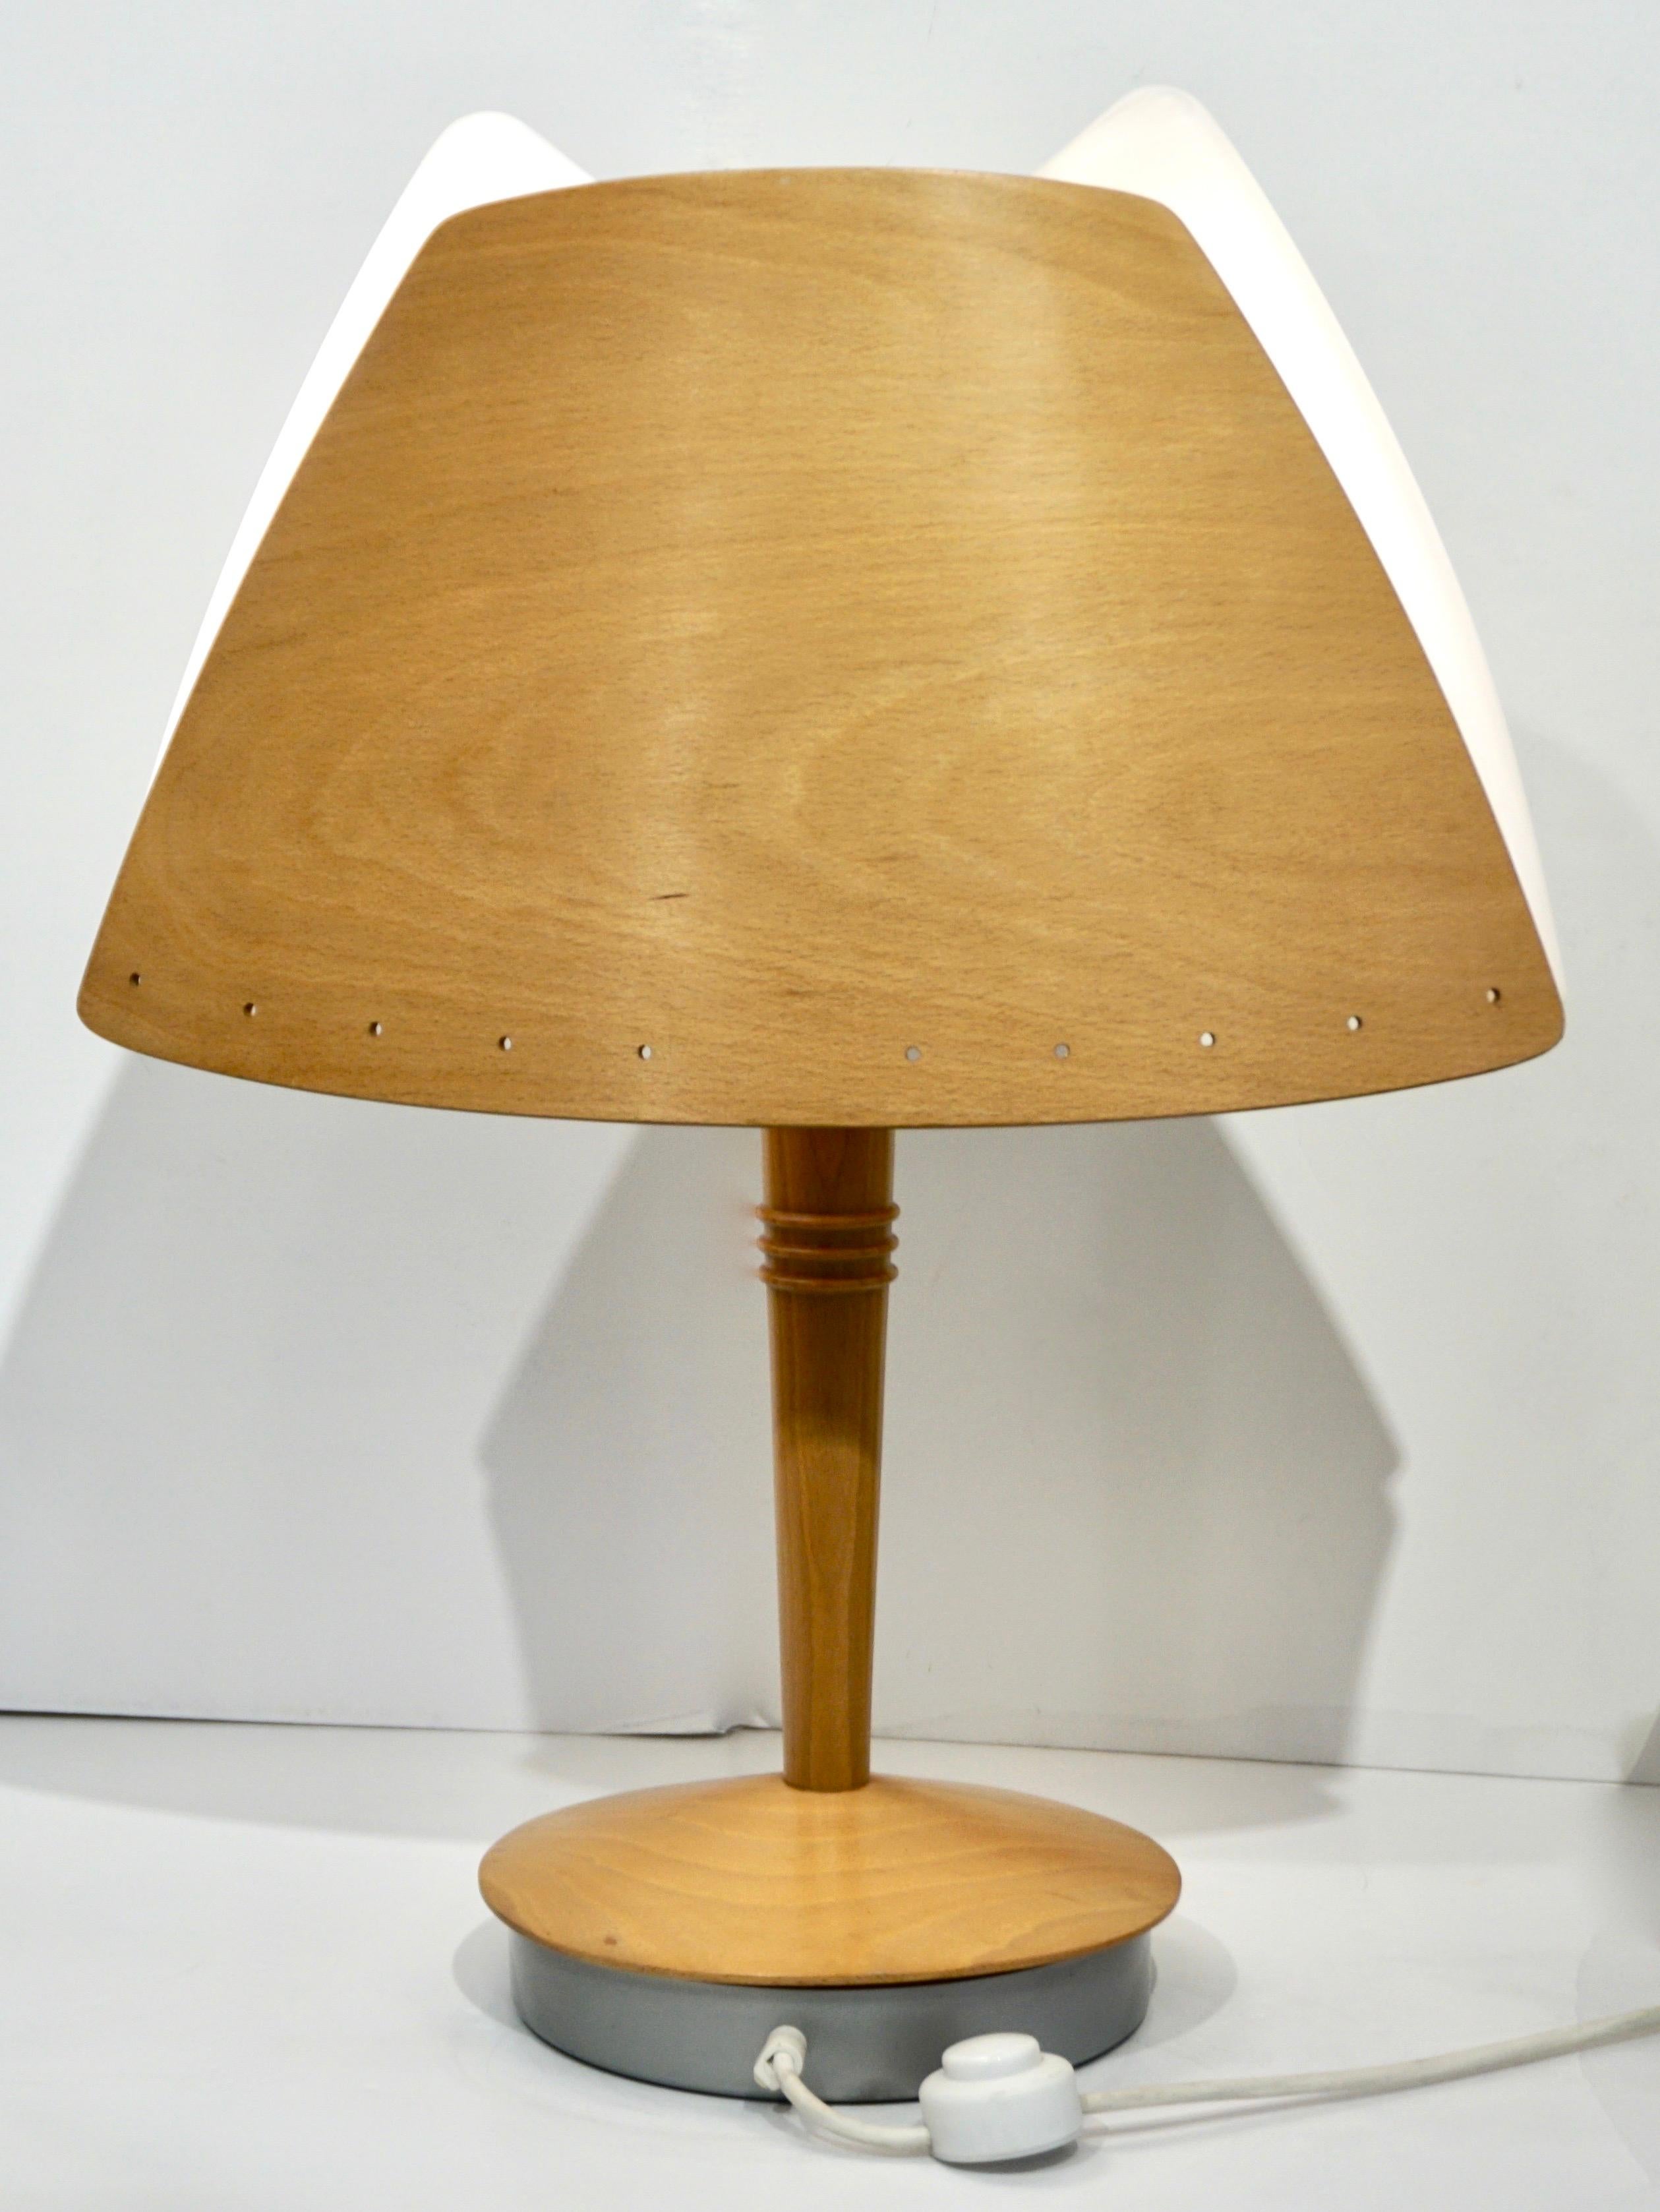 1970 French Vintage Birch Wood and Acrylic Table Lamp for Barcelona Hilton Hotel For Sale 1